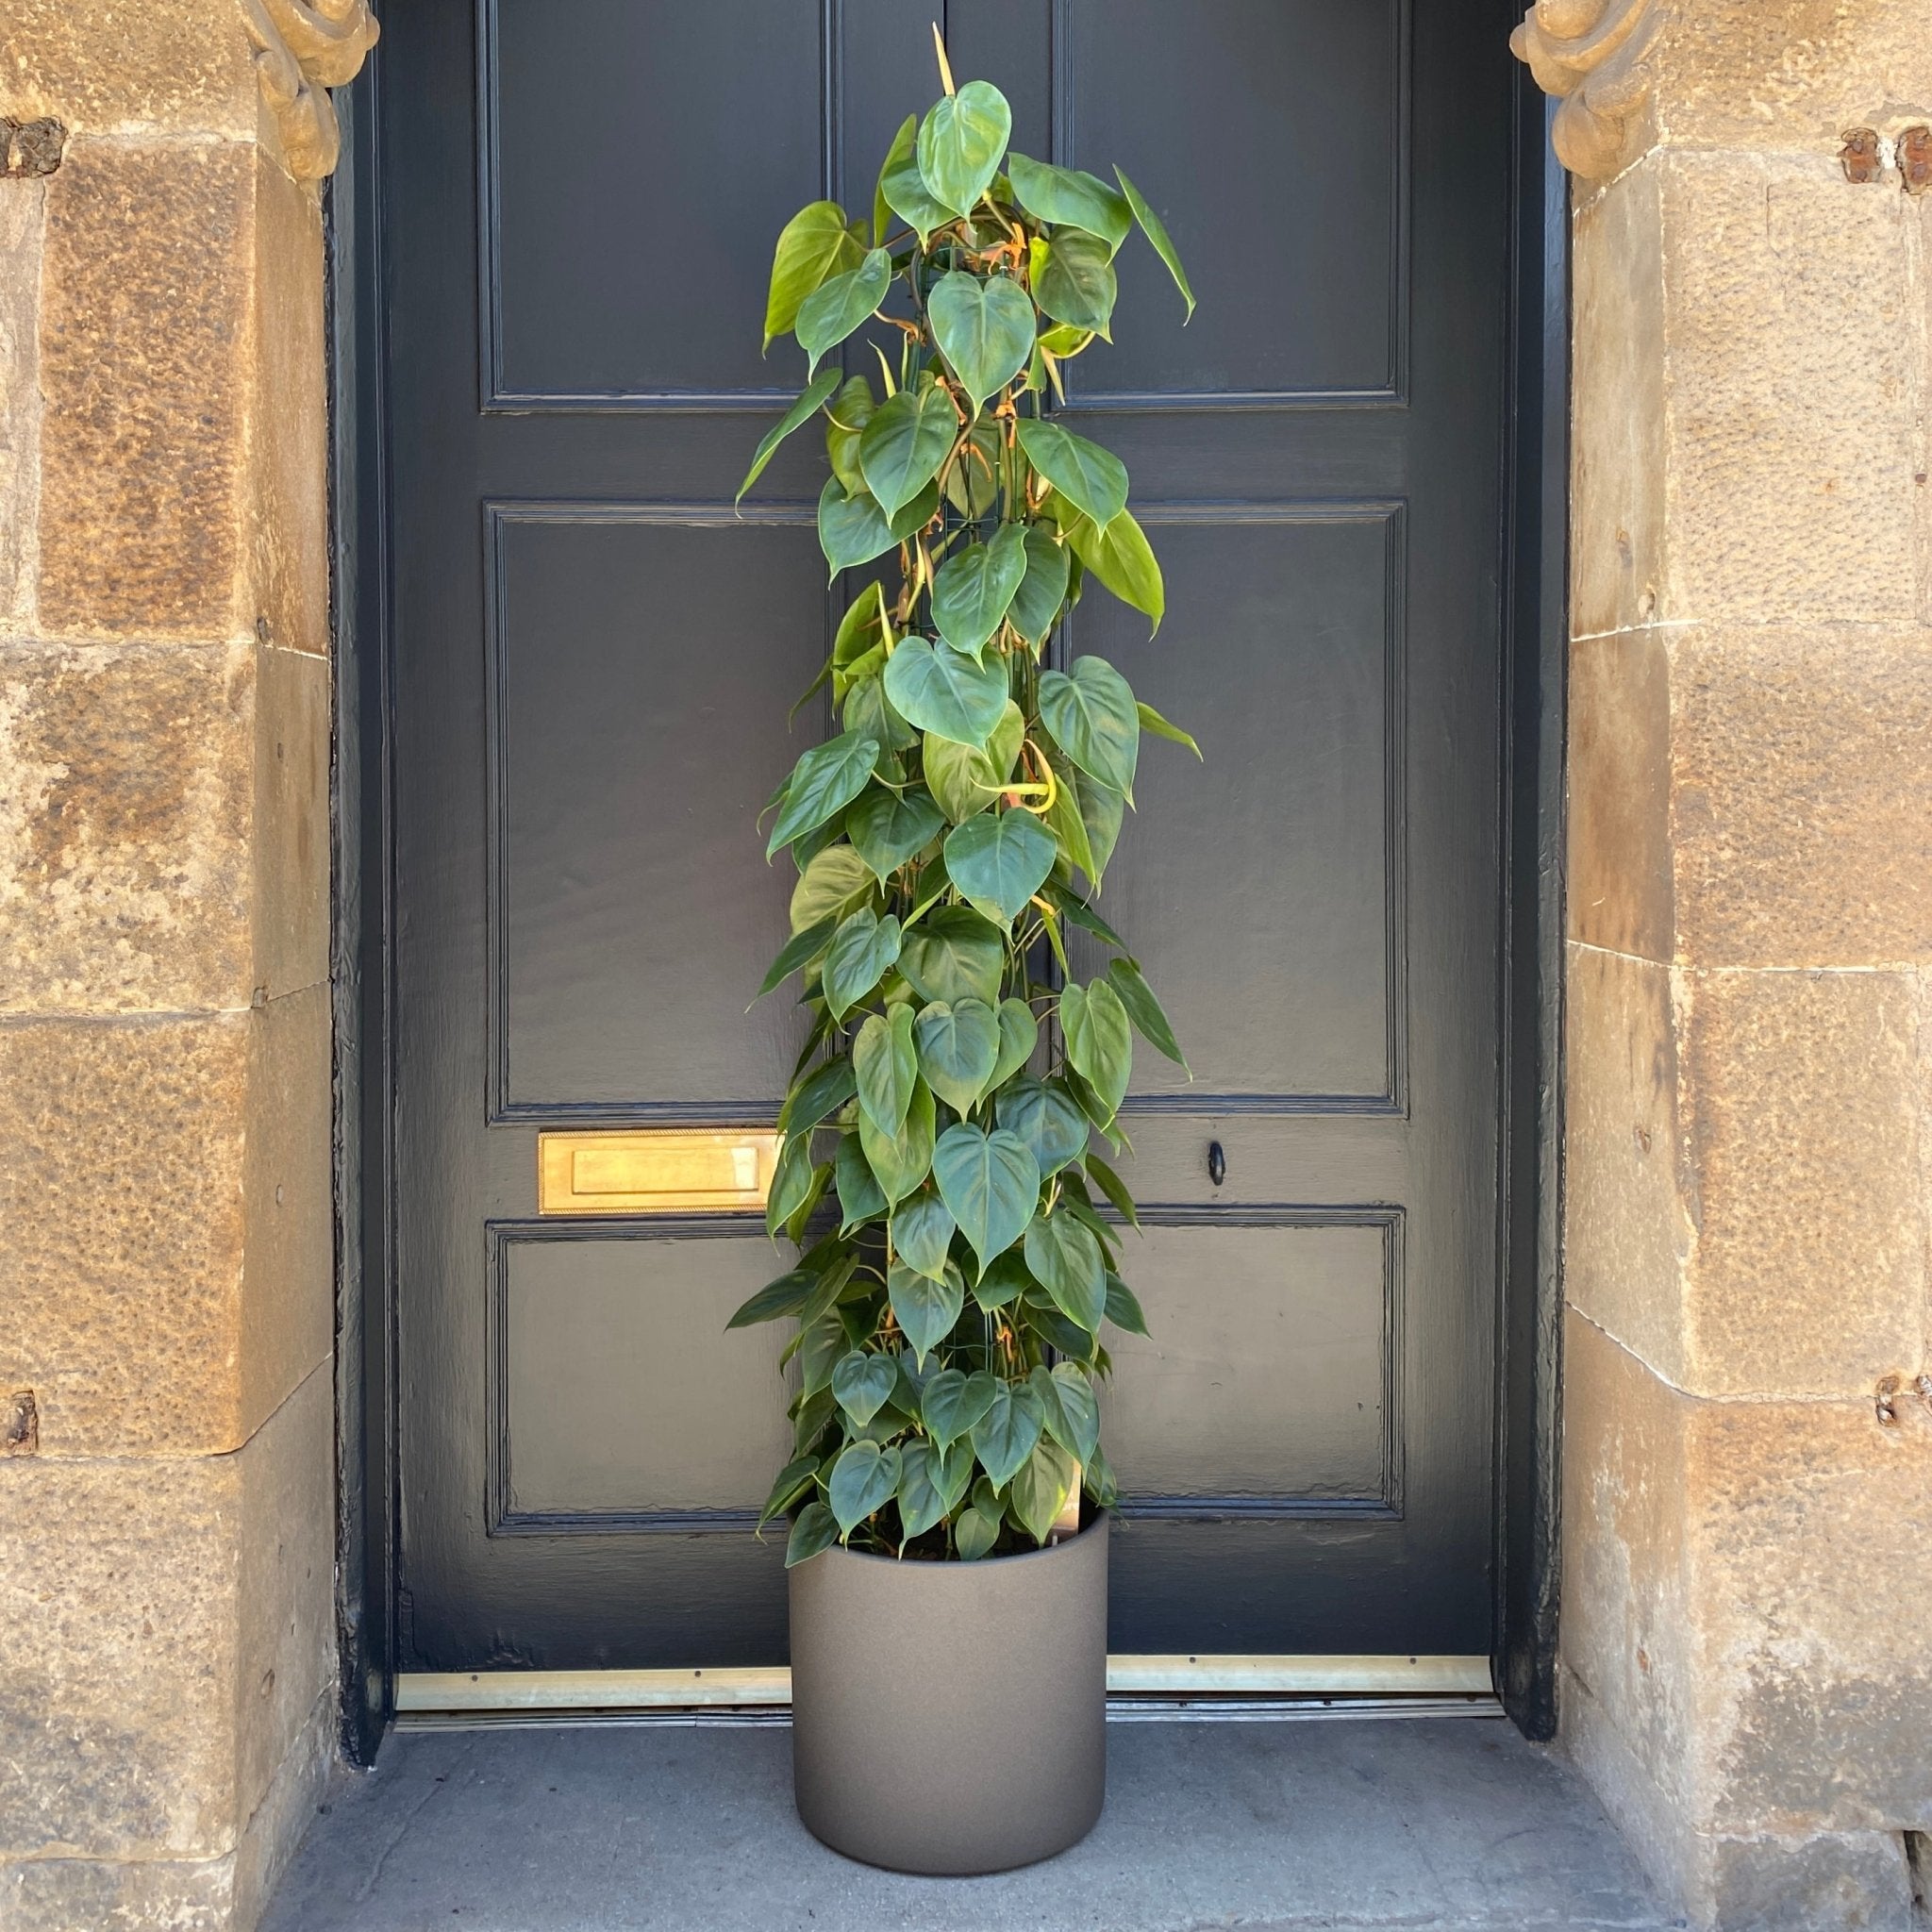 Philodendron scandens (160cm) - grow urban. UK